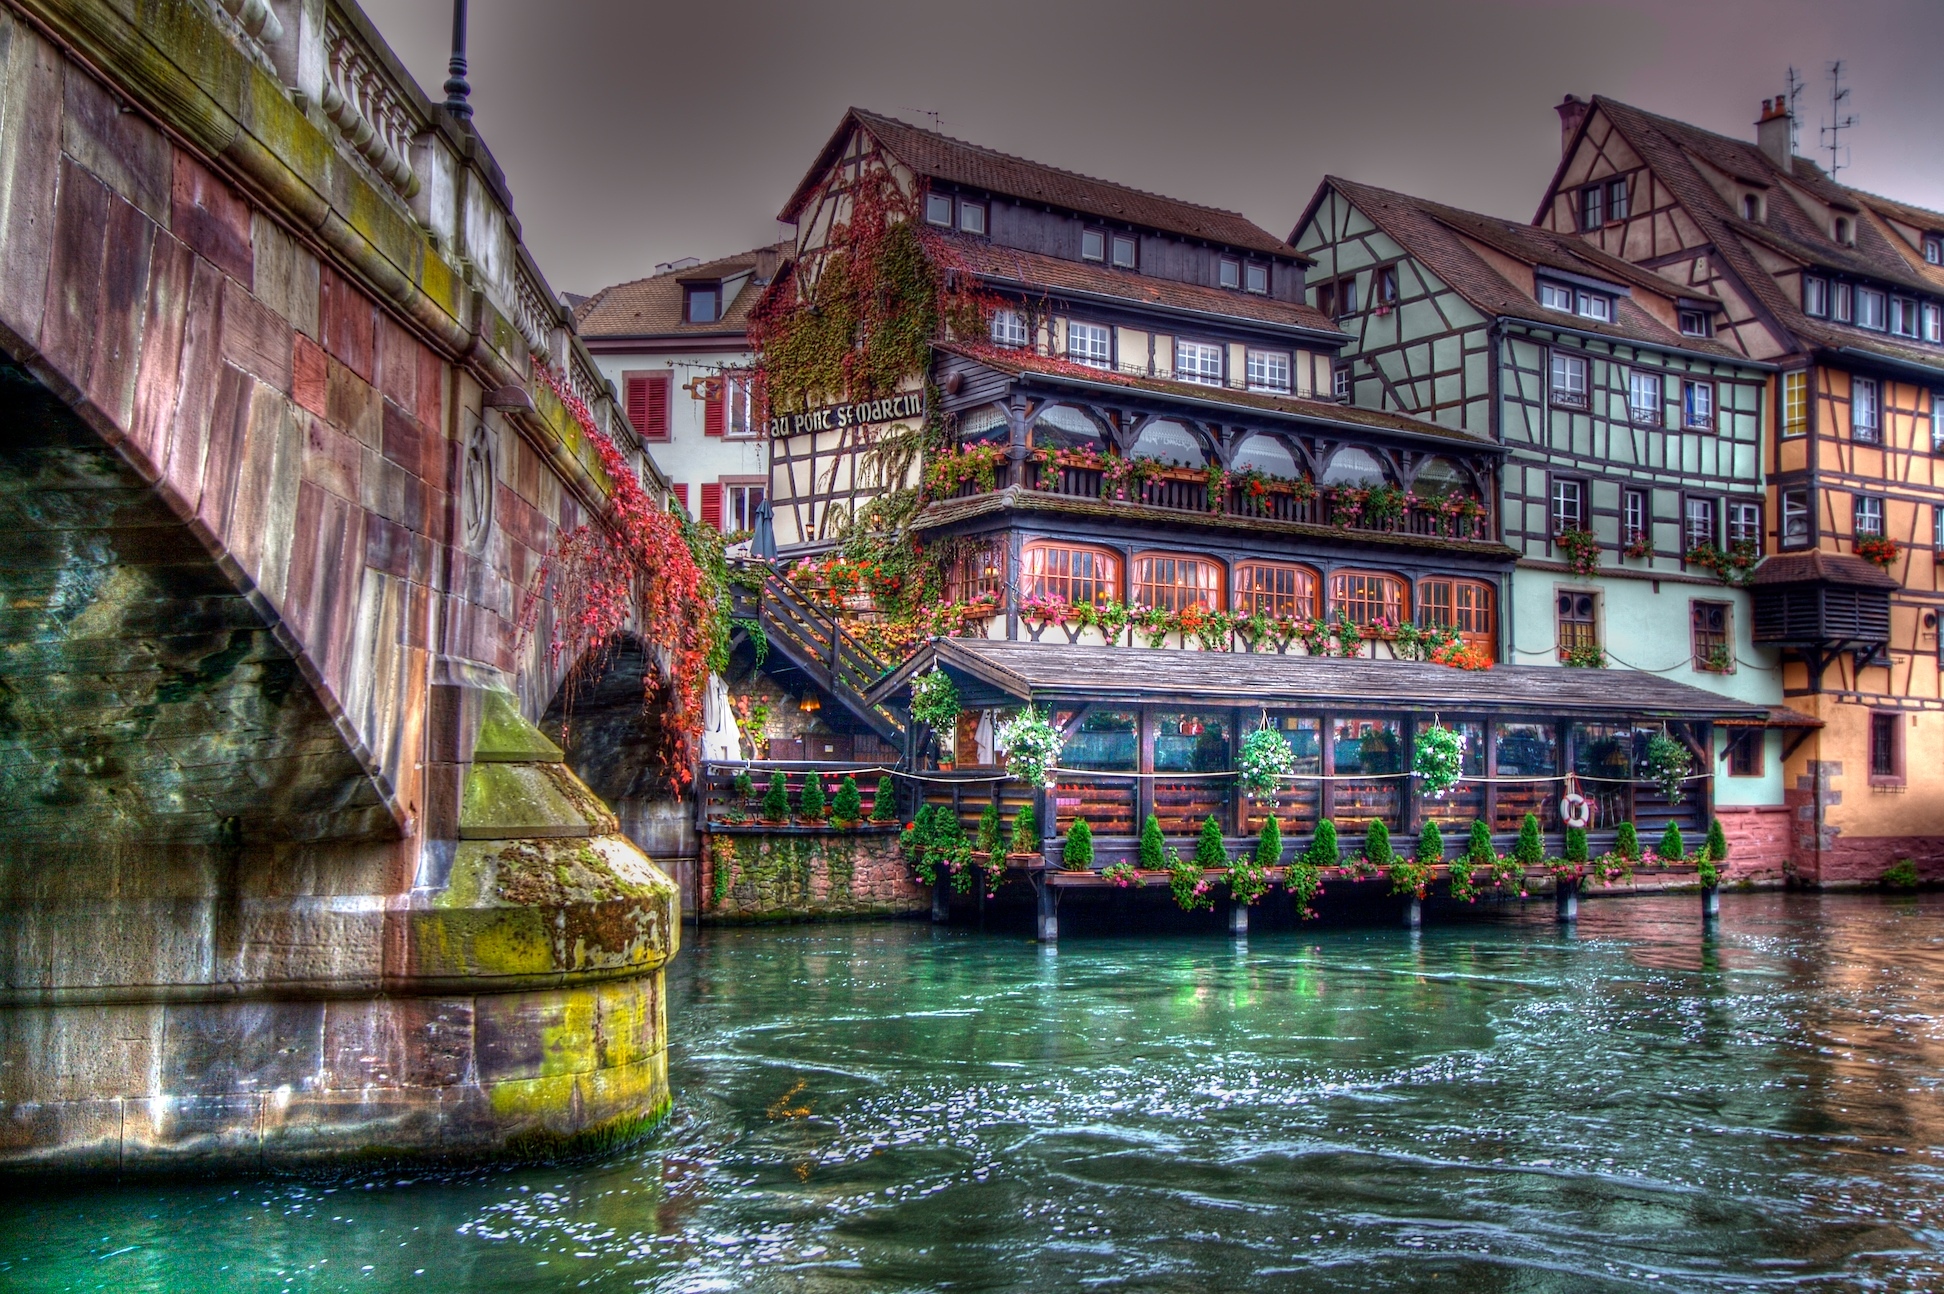 Man Made House Colors Colorful Bridge Canal HDR France Strasbourg 1944x1294